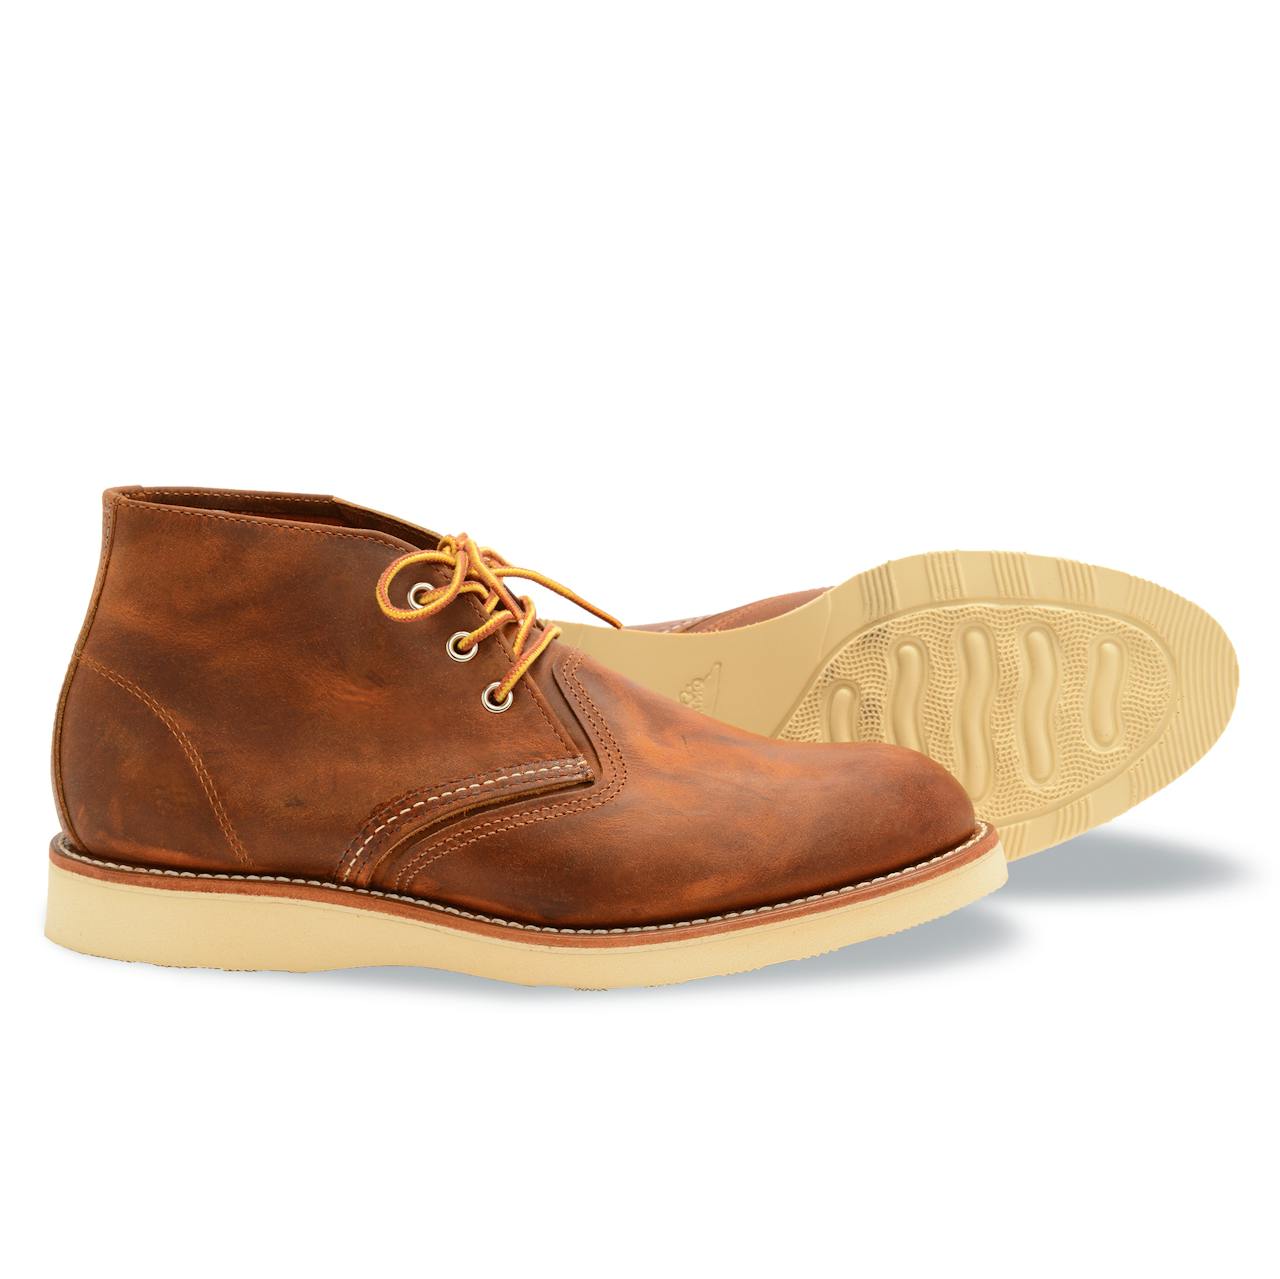 Red Heritage Chukka Boot - Copper Rough & Tough | Chukka Boots | Huckberry